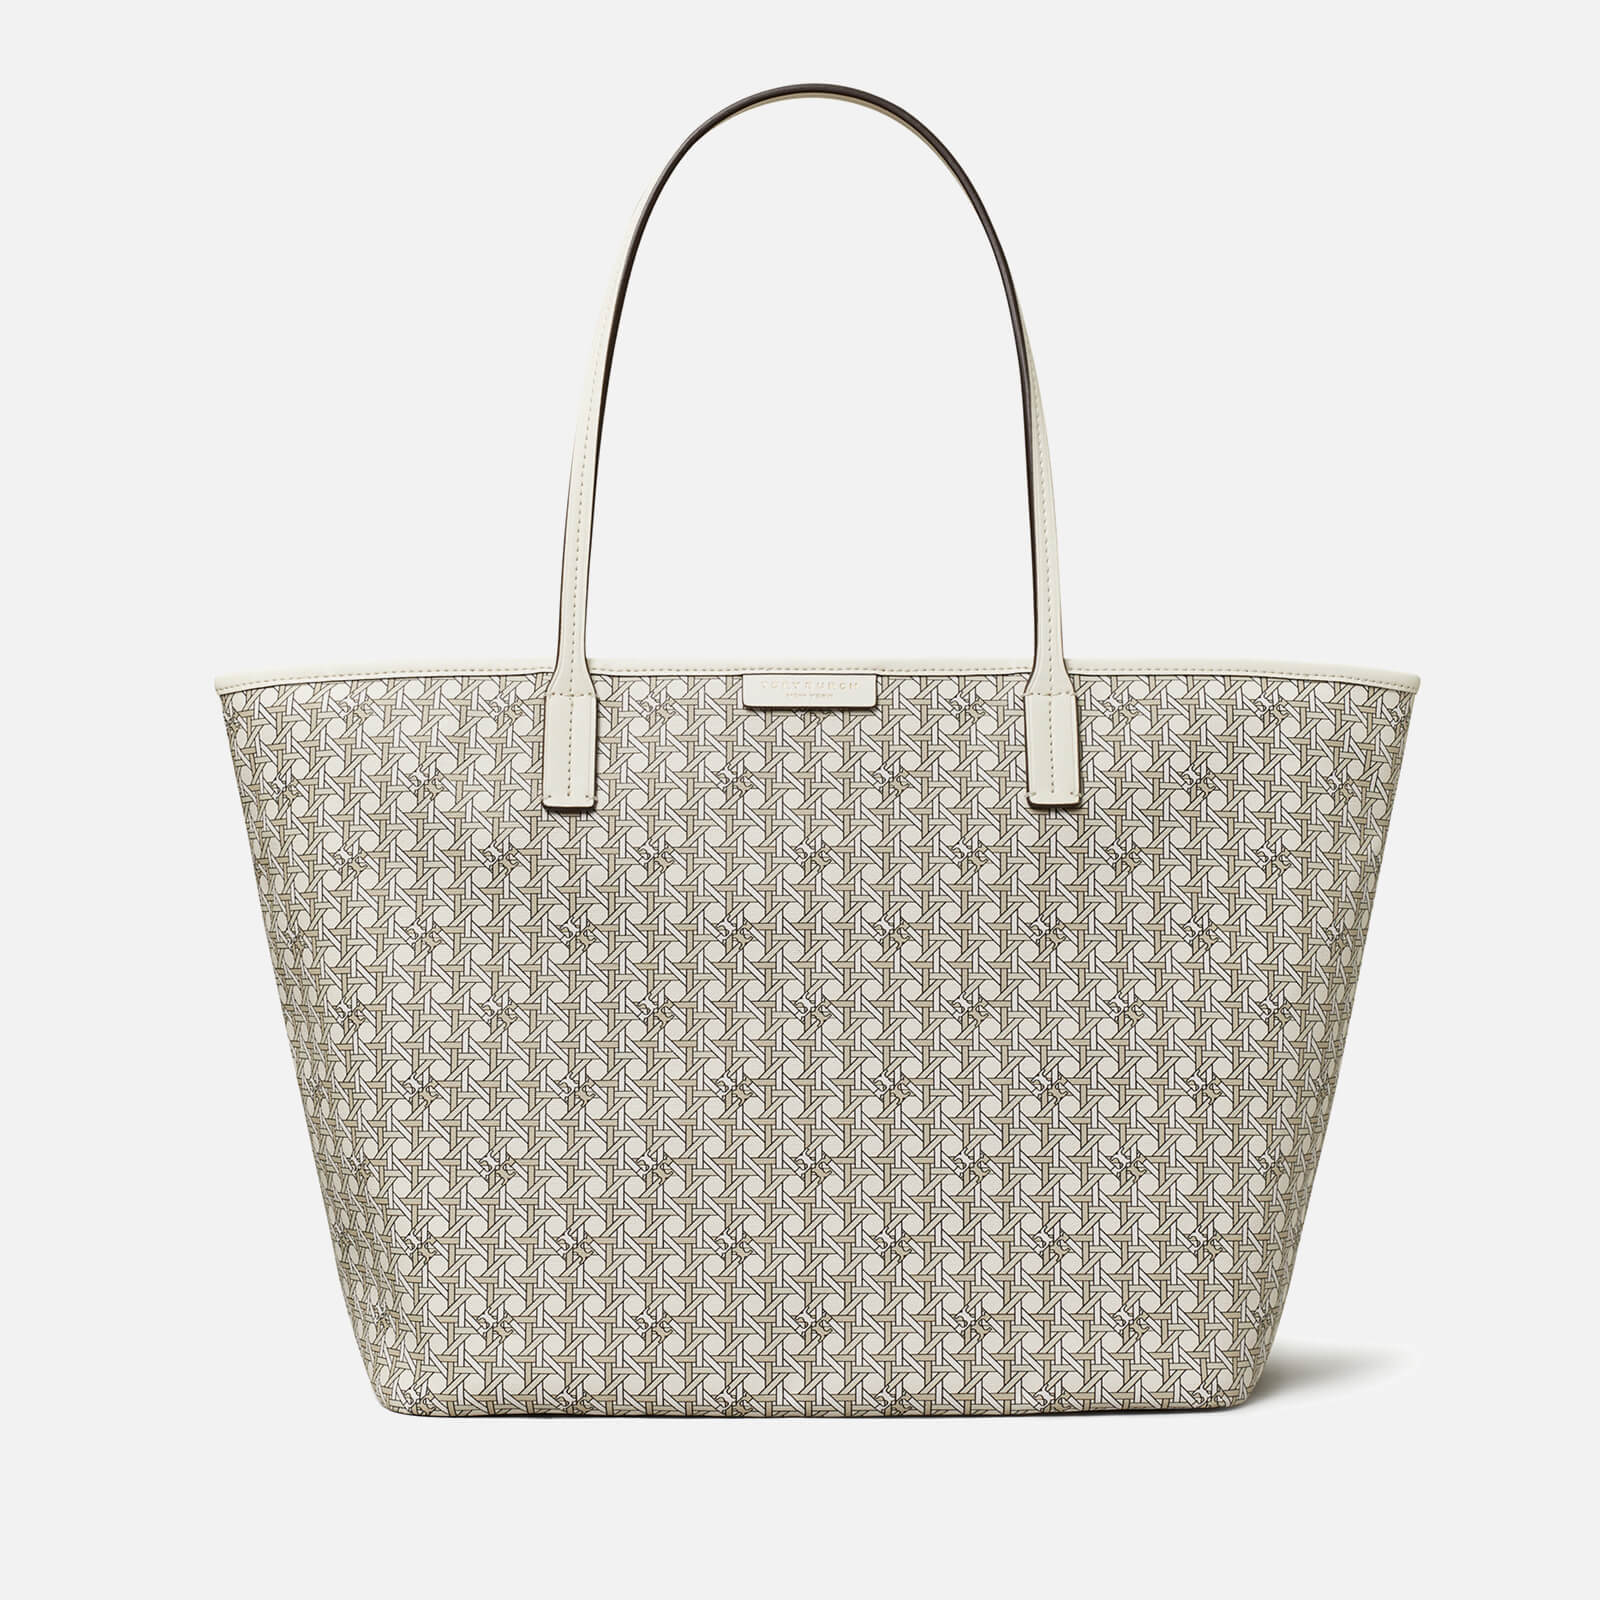 Tory Burch Small Monogram Coated-Canvas Tote Bag